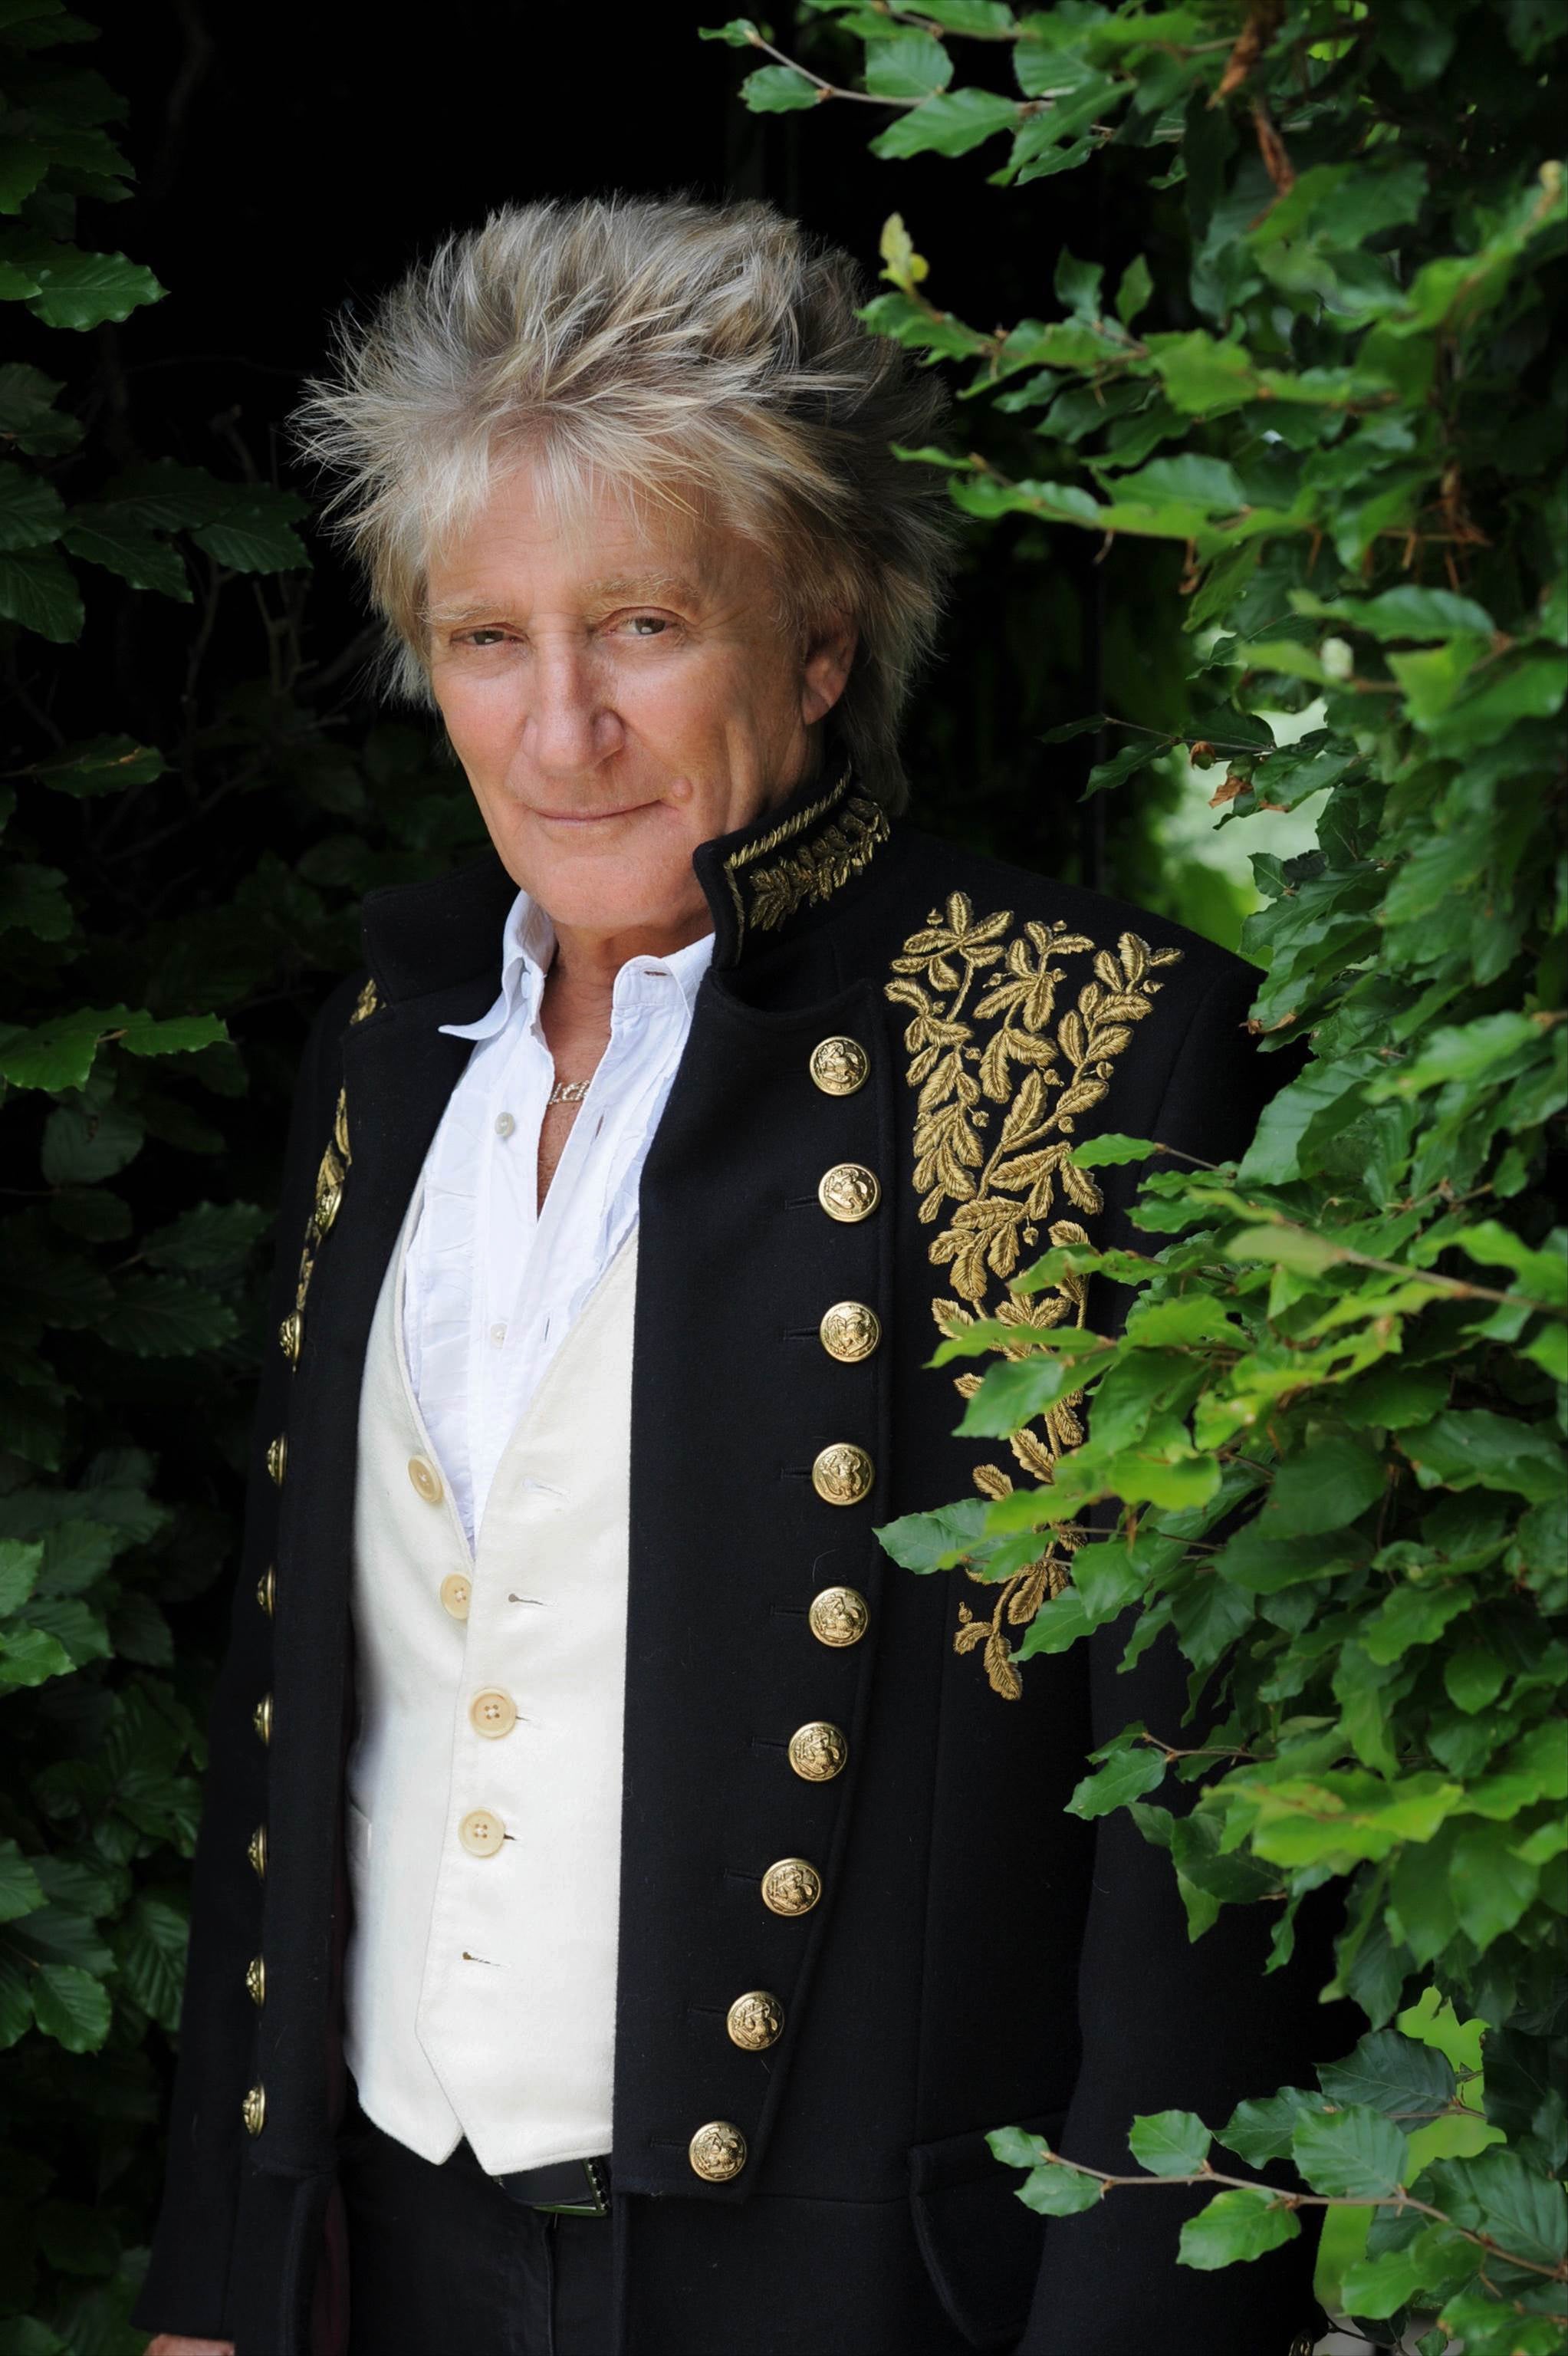 Image used with permission from Ticketmaster | Rod Stewart with Special Guest Cyndi Lauper tickets